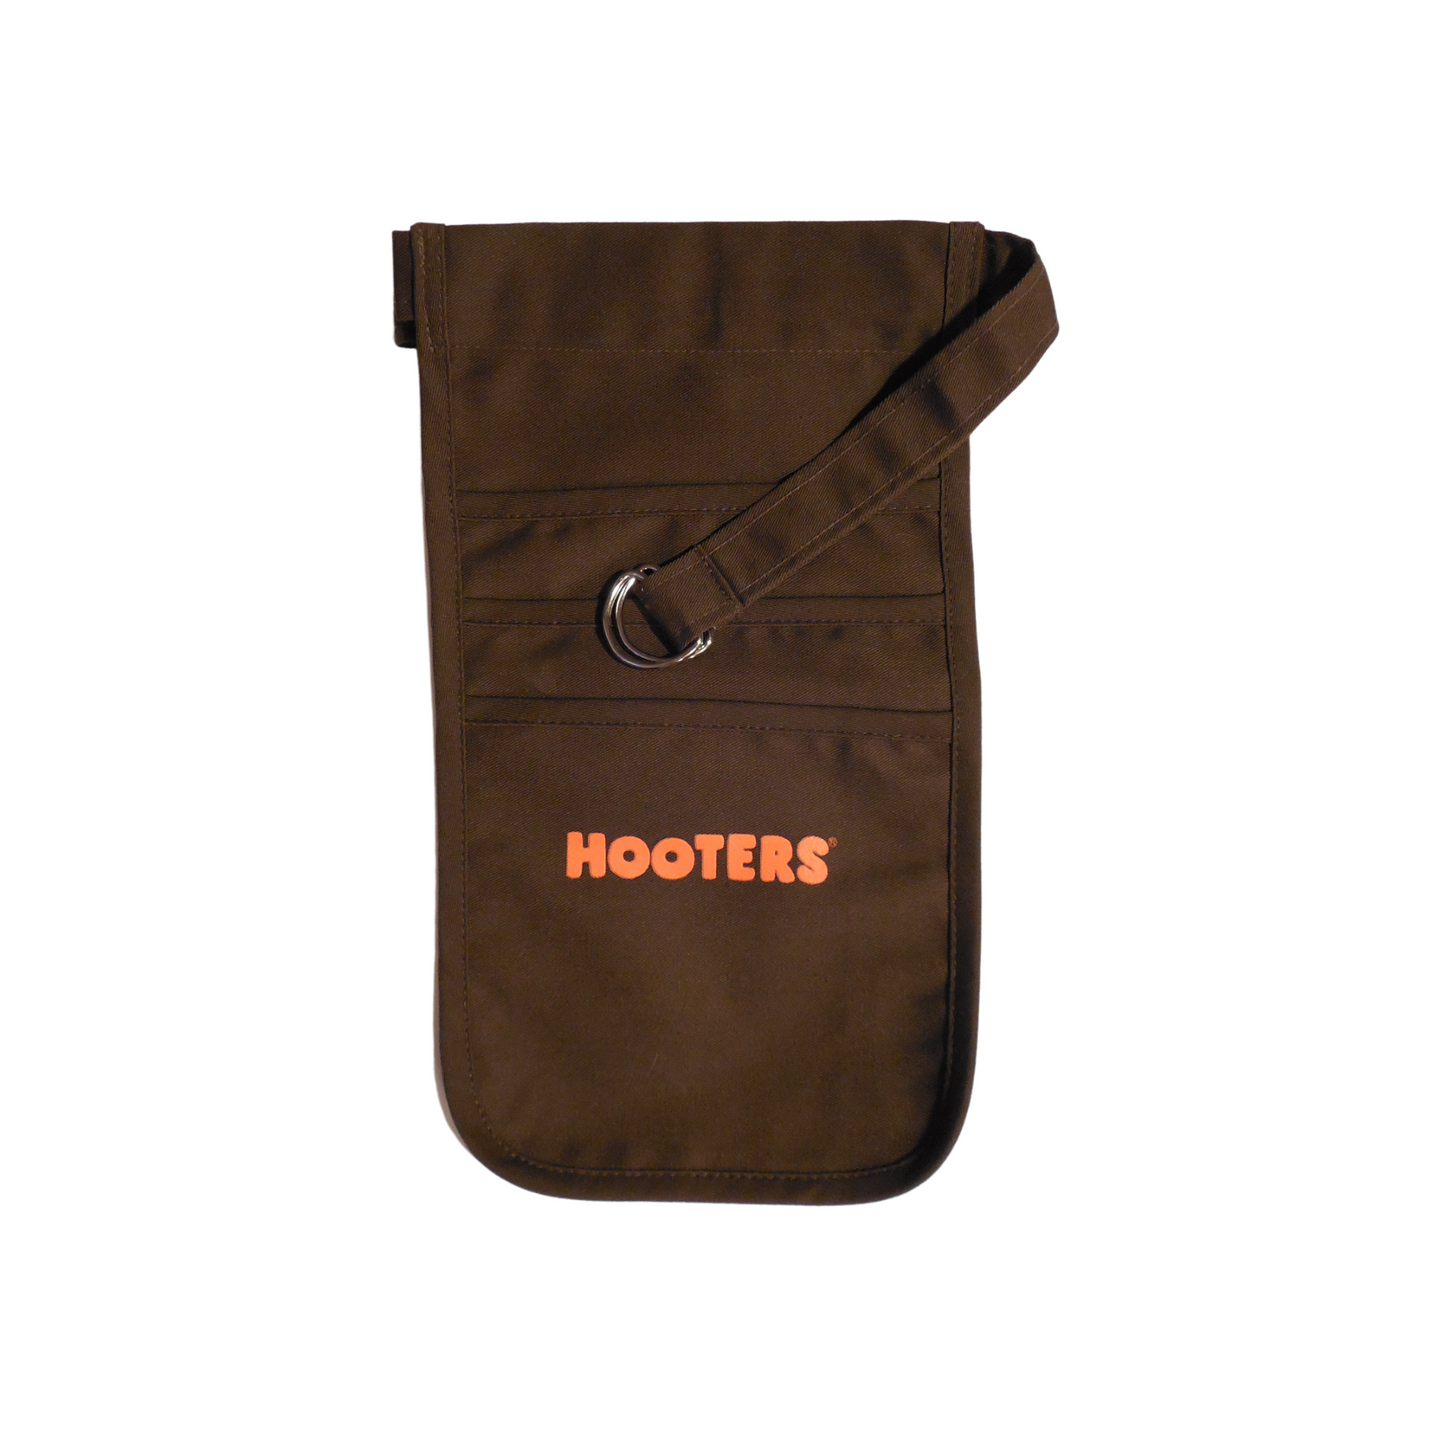 Hooters Girl Women's Uniform Outfit Costume Brown Pouch and Nametag